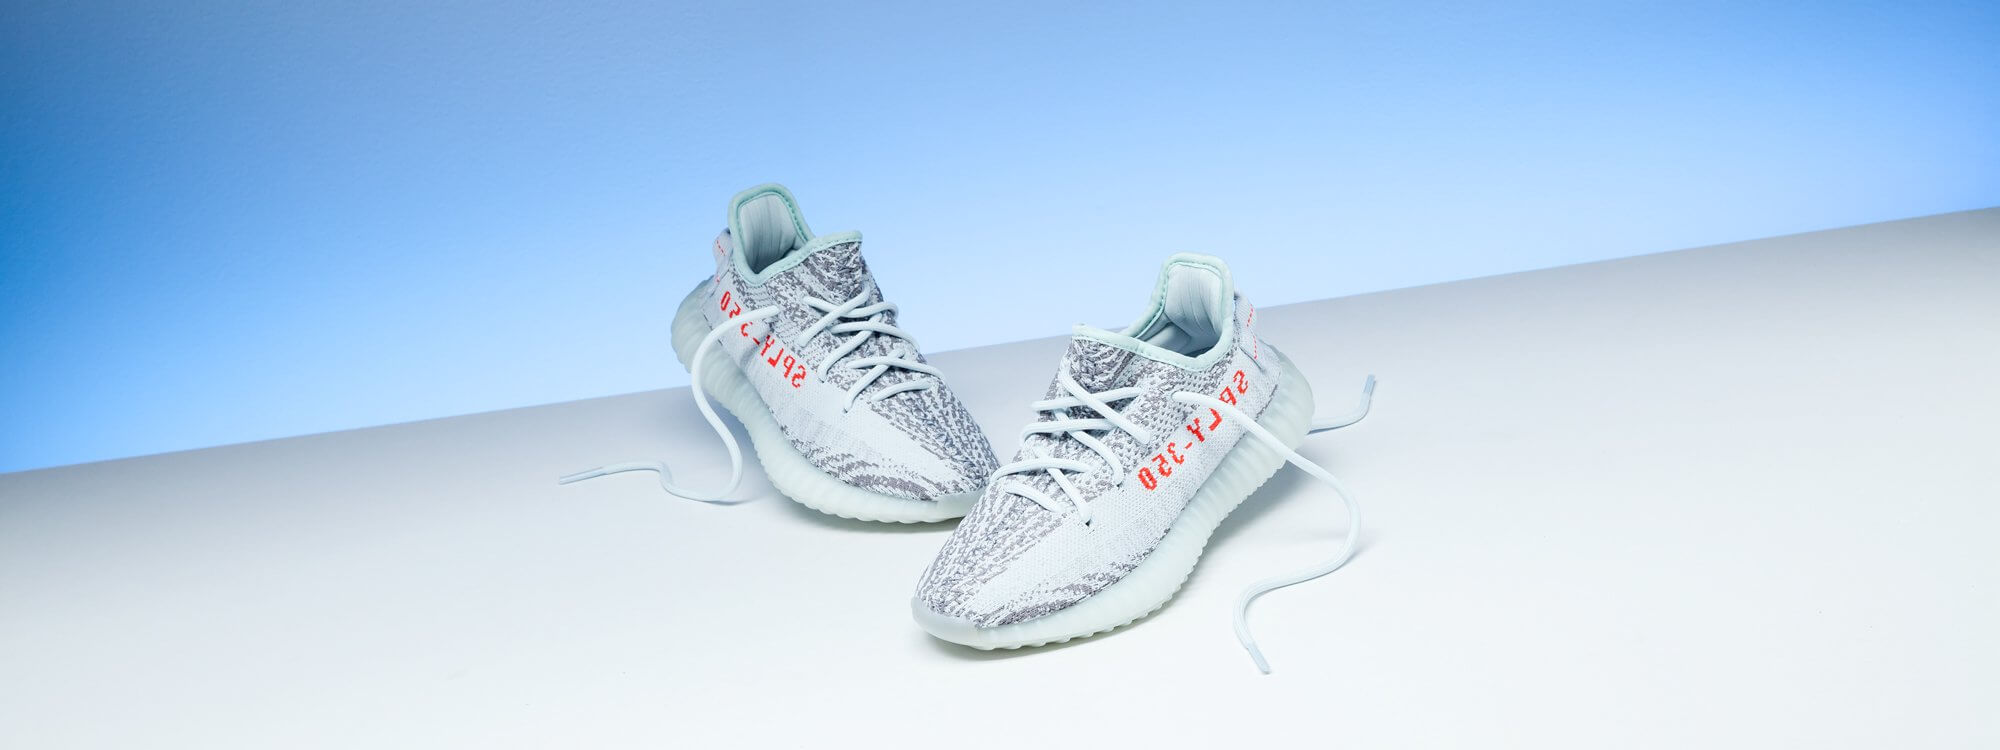  Yeezy Boost 350 V2 Blue Tint kids outfit